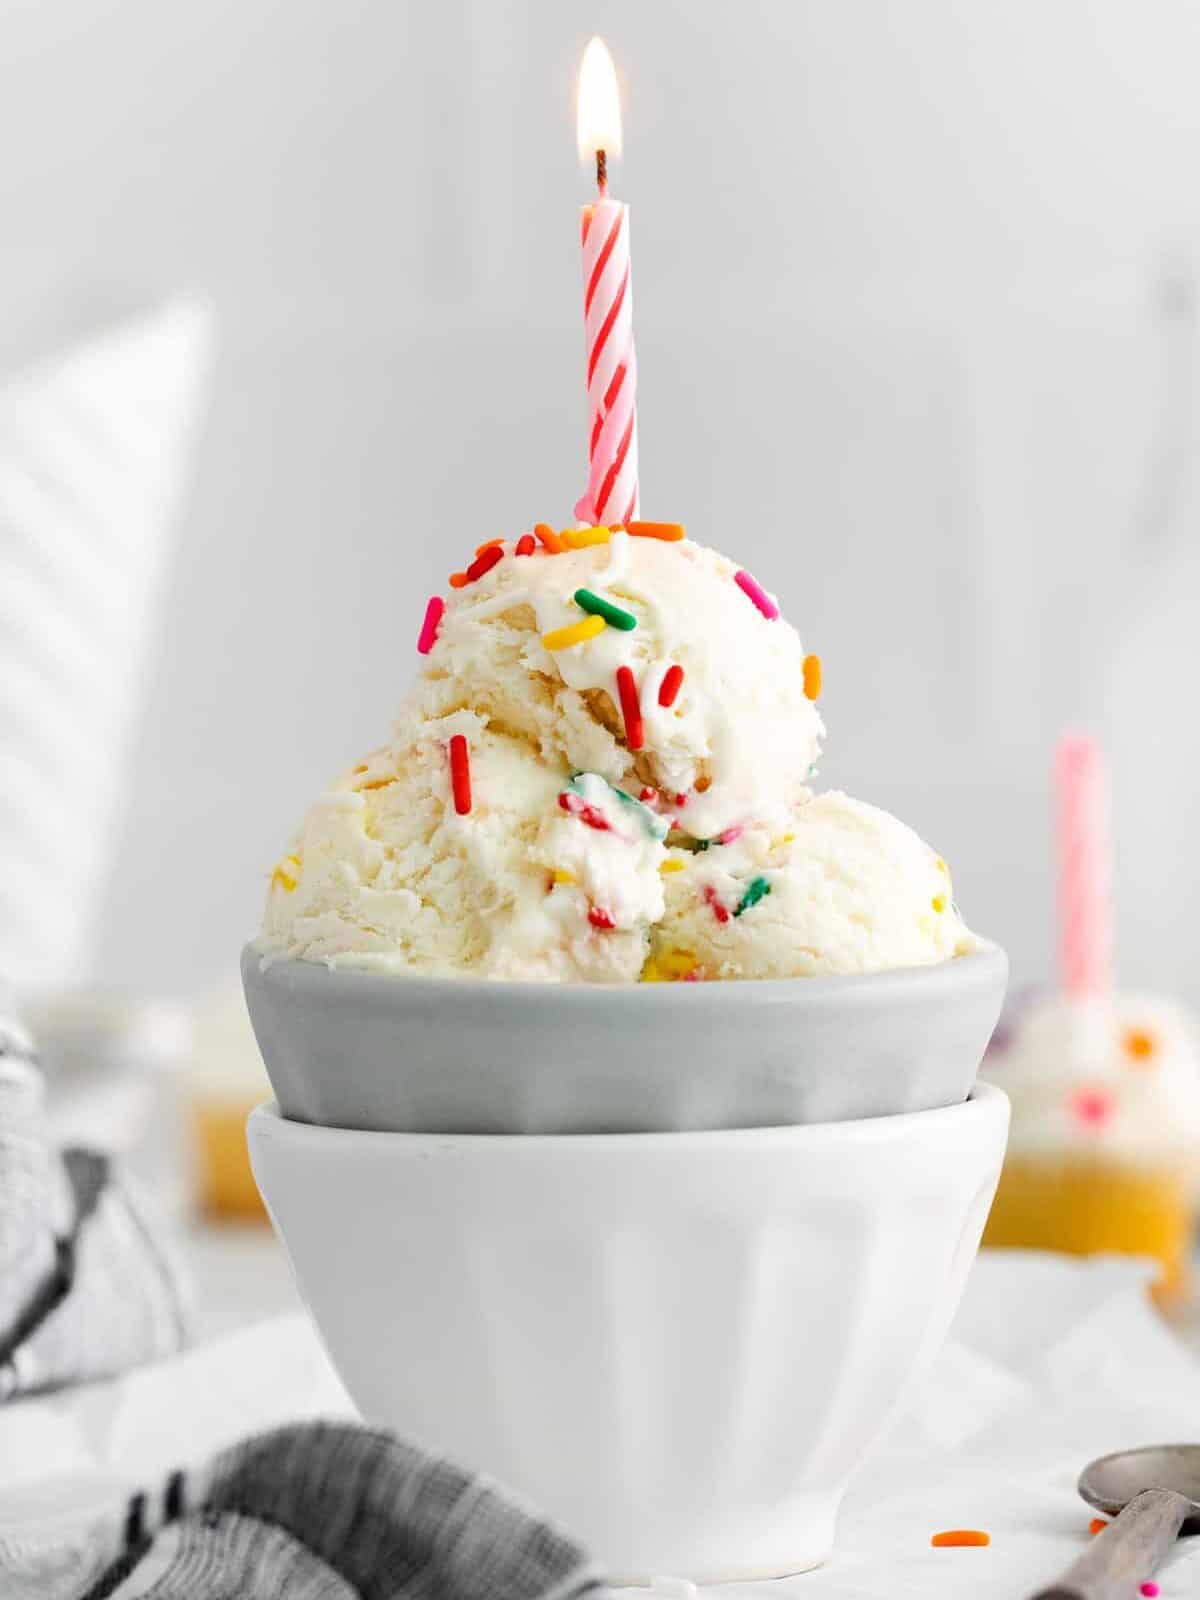 side view of 3 scoops of birthday cake ice cream in a gray bowl set in a white bowl topped with a lit pink birthday candle.